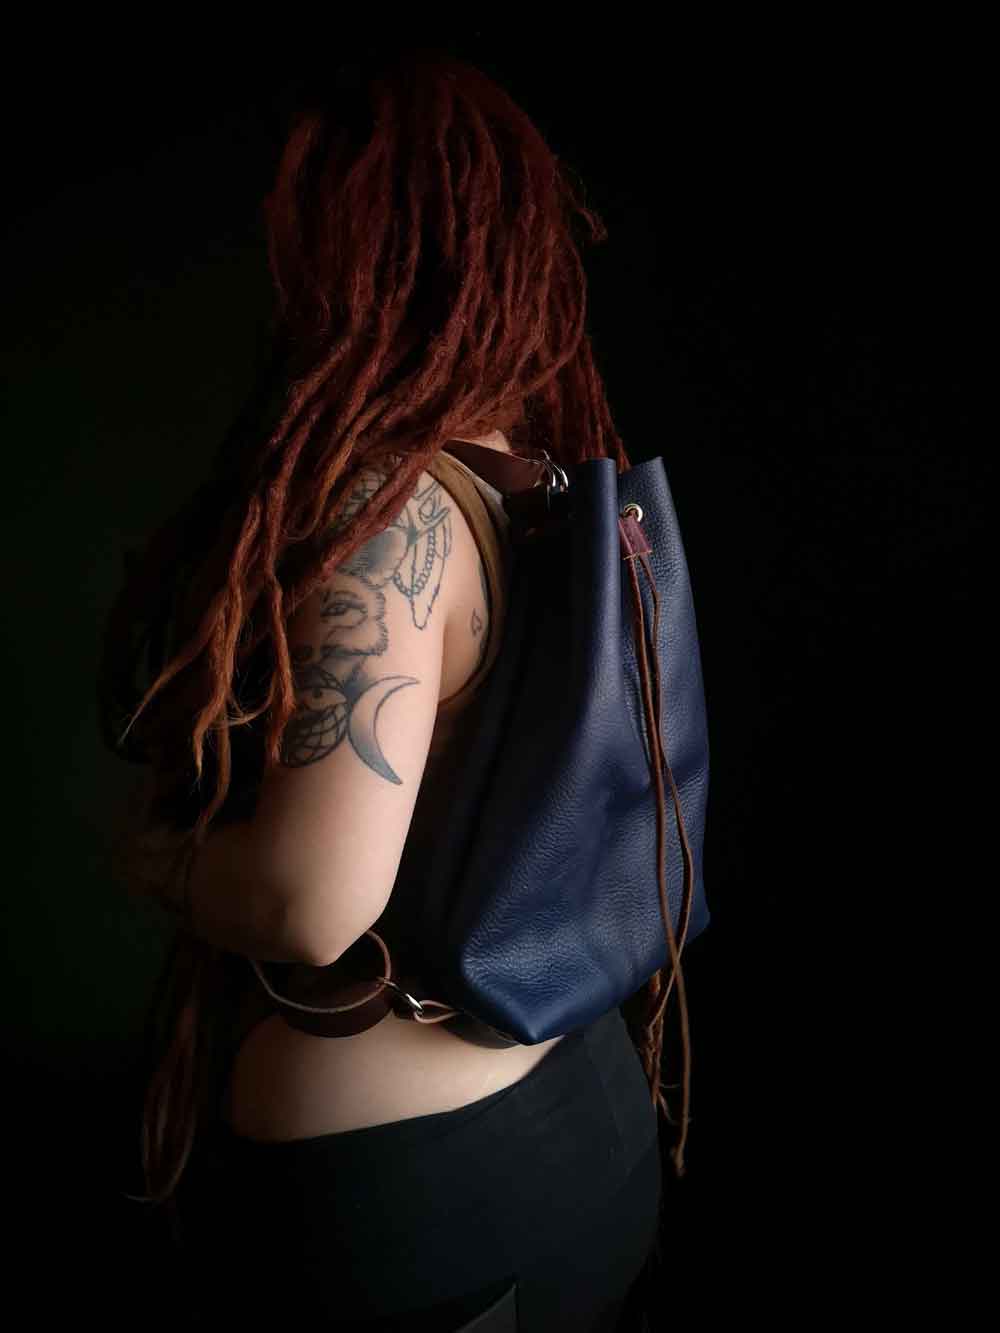 Shift - Convertible Leather Backpack